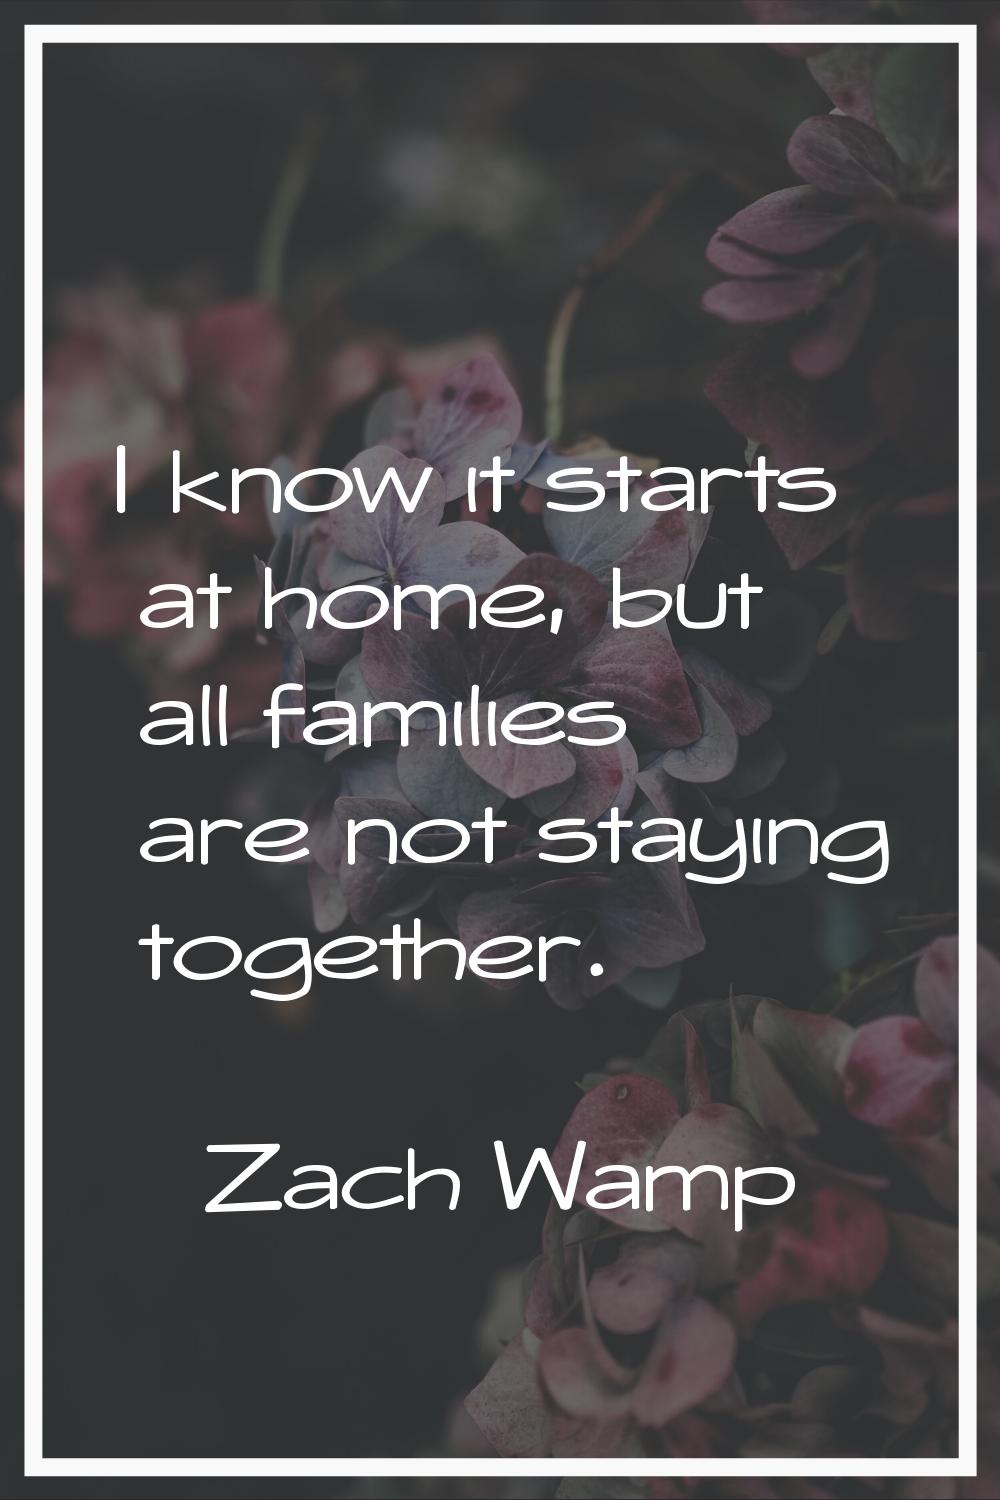 I know it starts at home, but all families are not staying together.